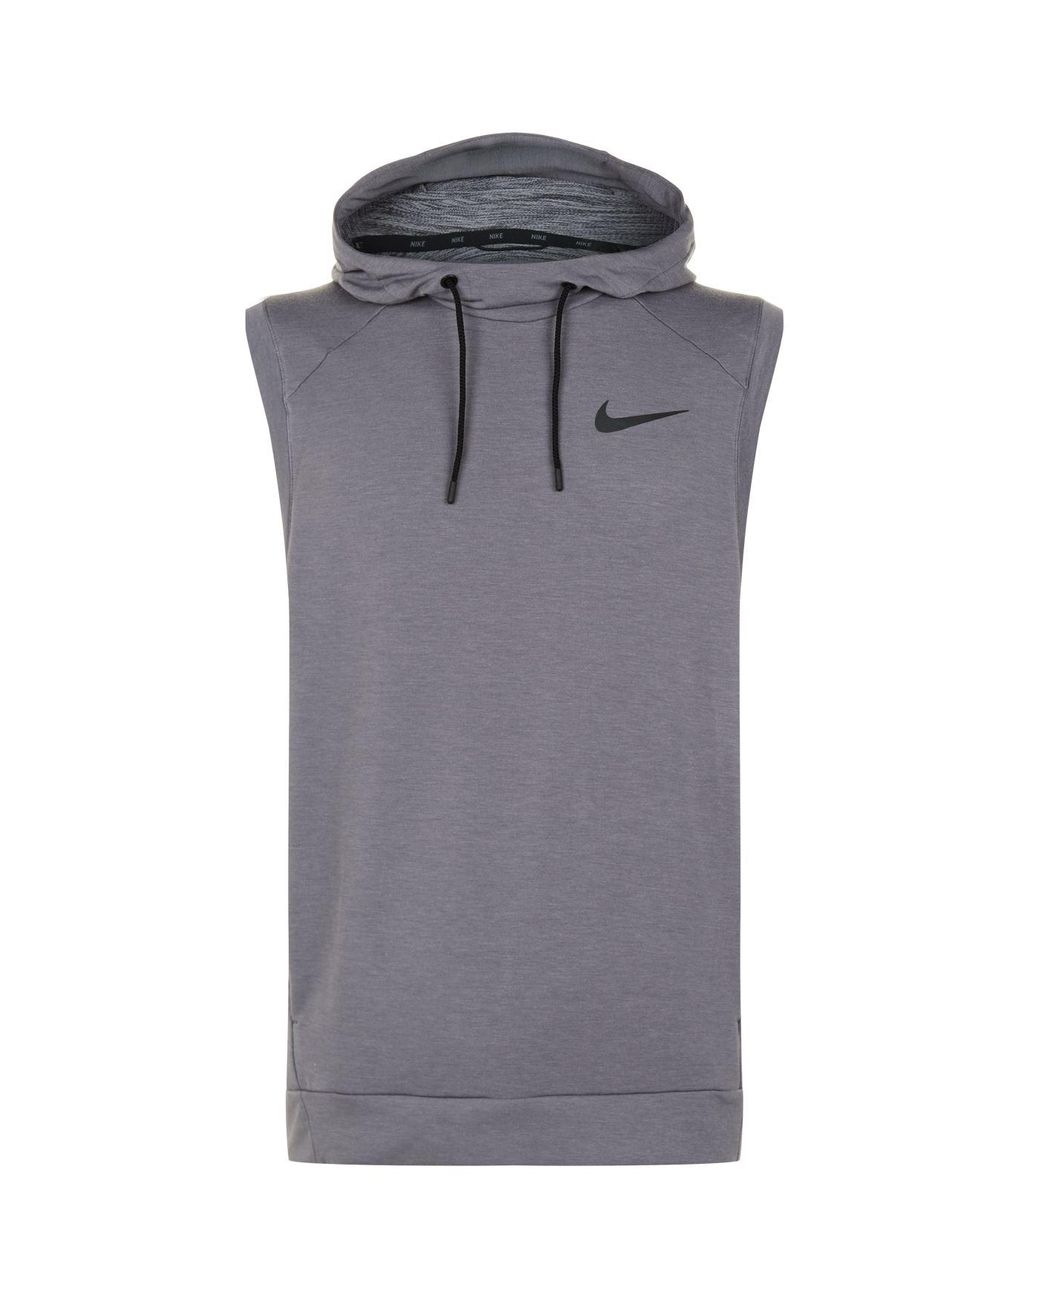 Nike Dri-fit Sleeveless Hoodie in for | Lyst